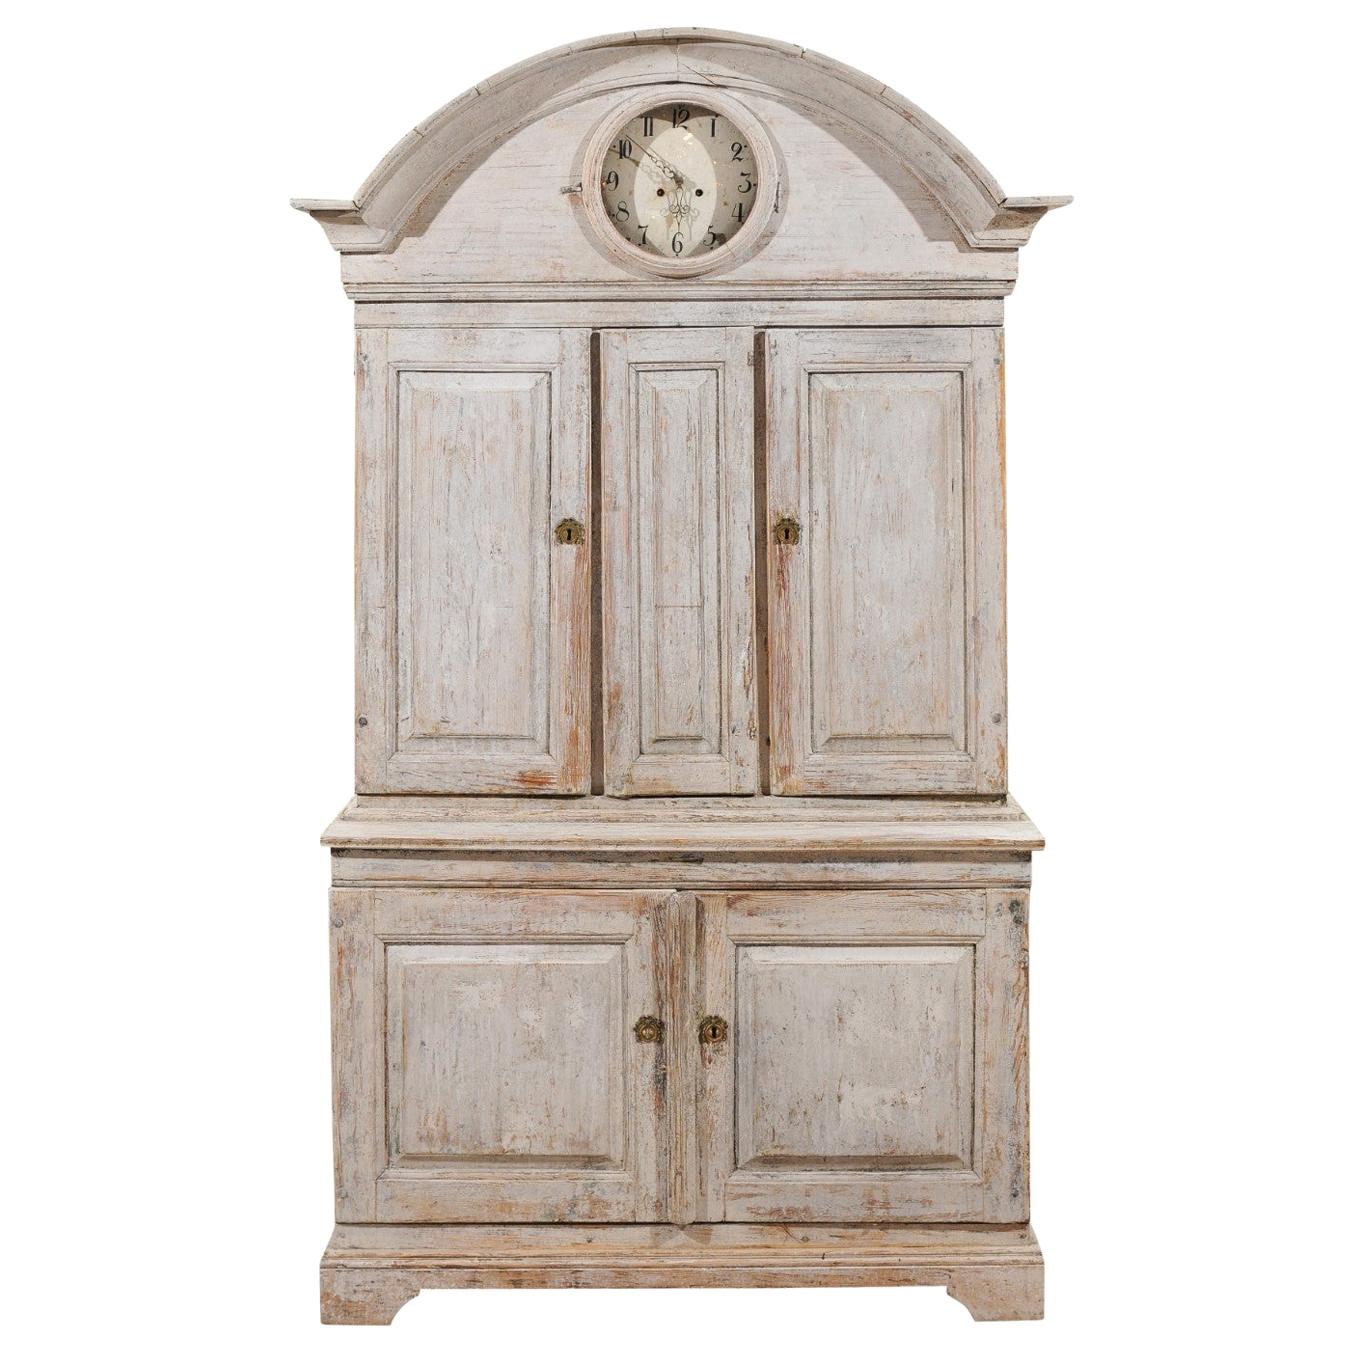 Swedish 1780s Gustavian Painted Clock Cupboard with Bonnet Top and Doors